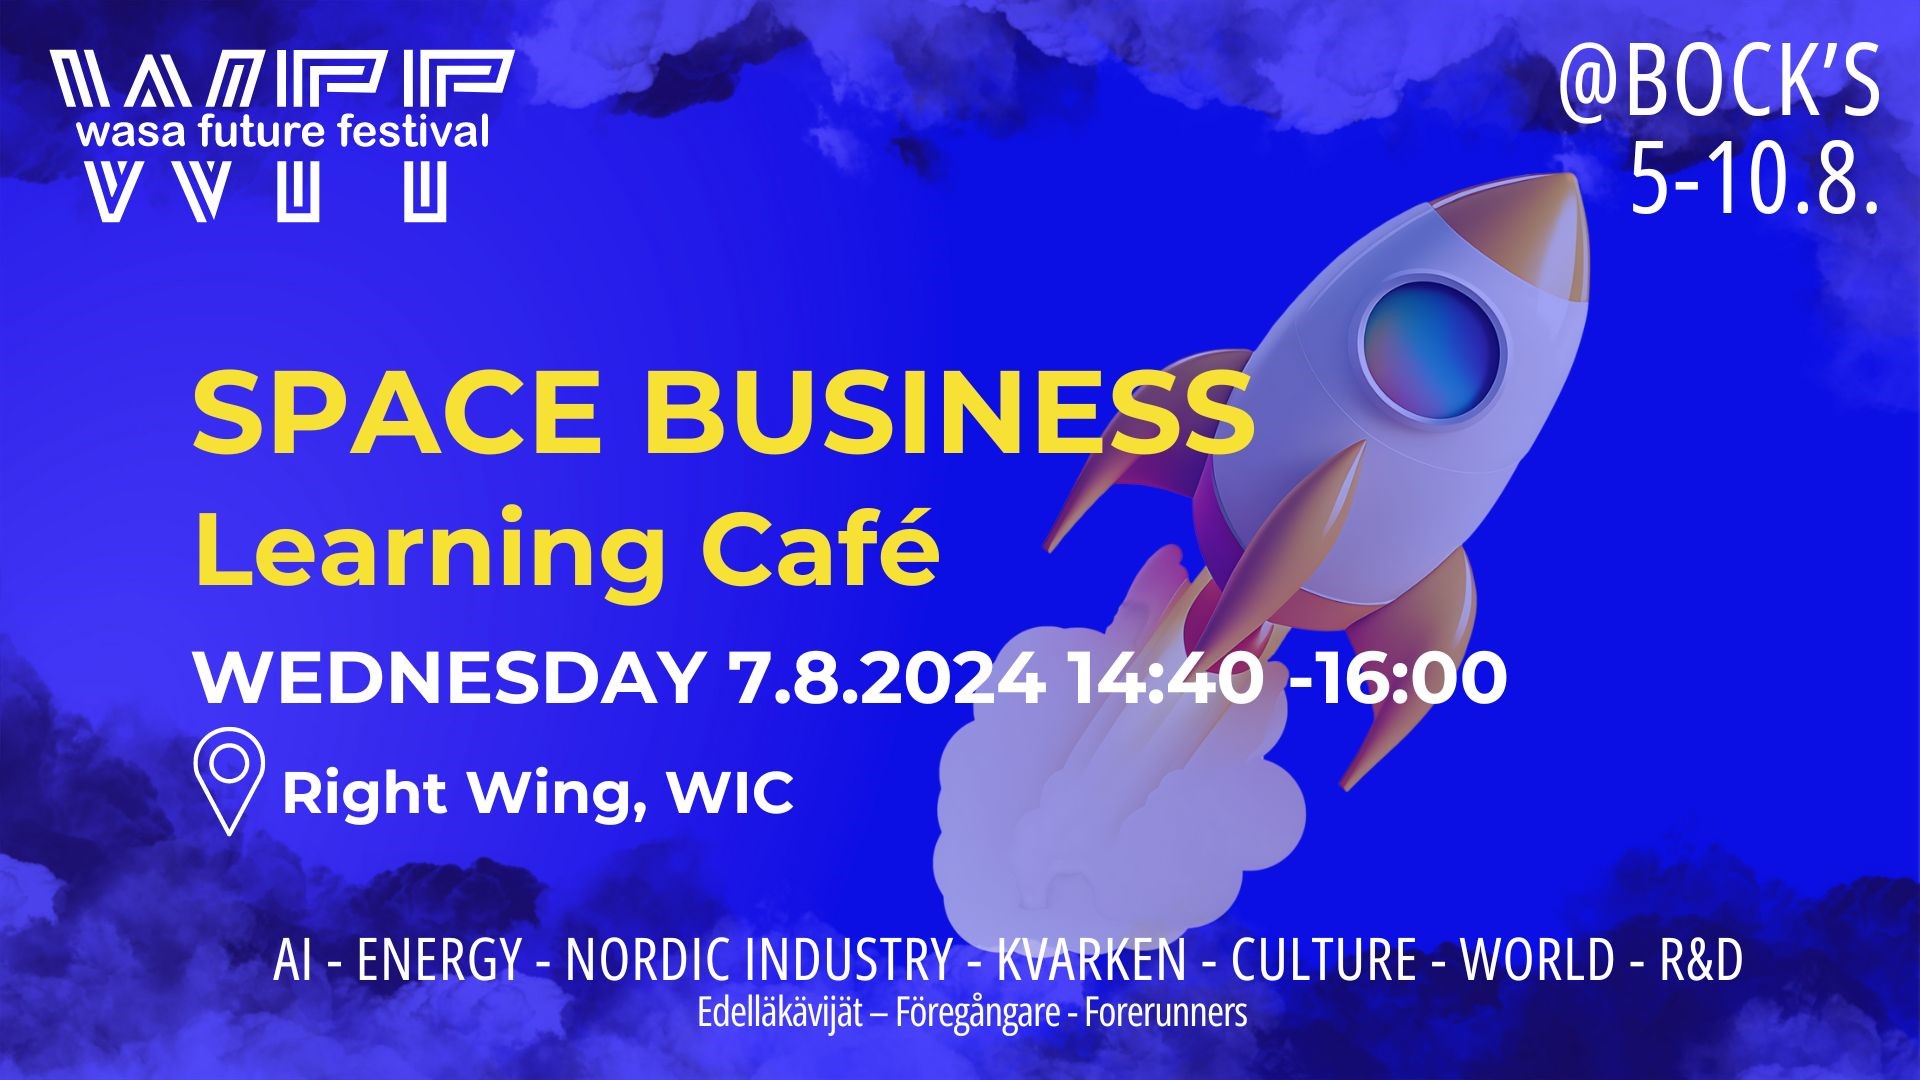 Space Business Learning Café at Wasa Future Festival